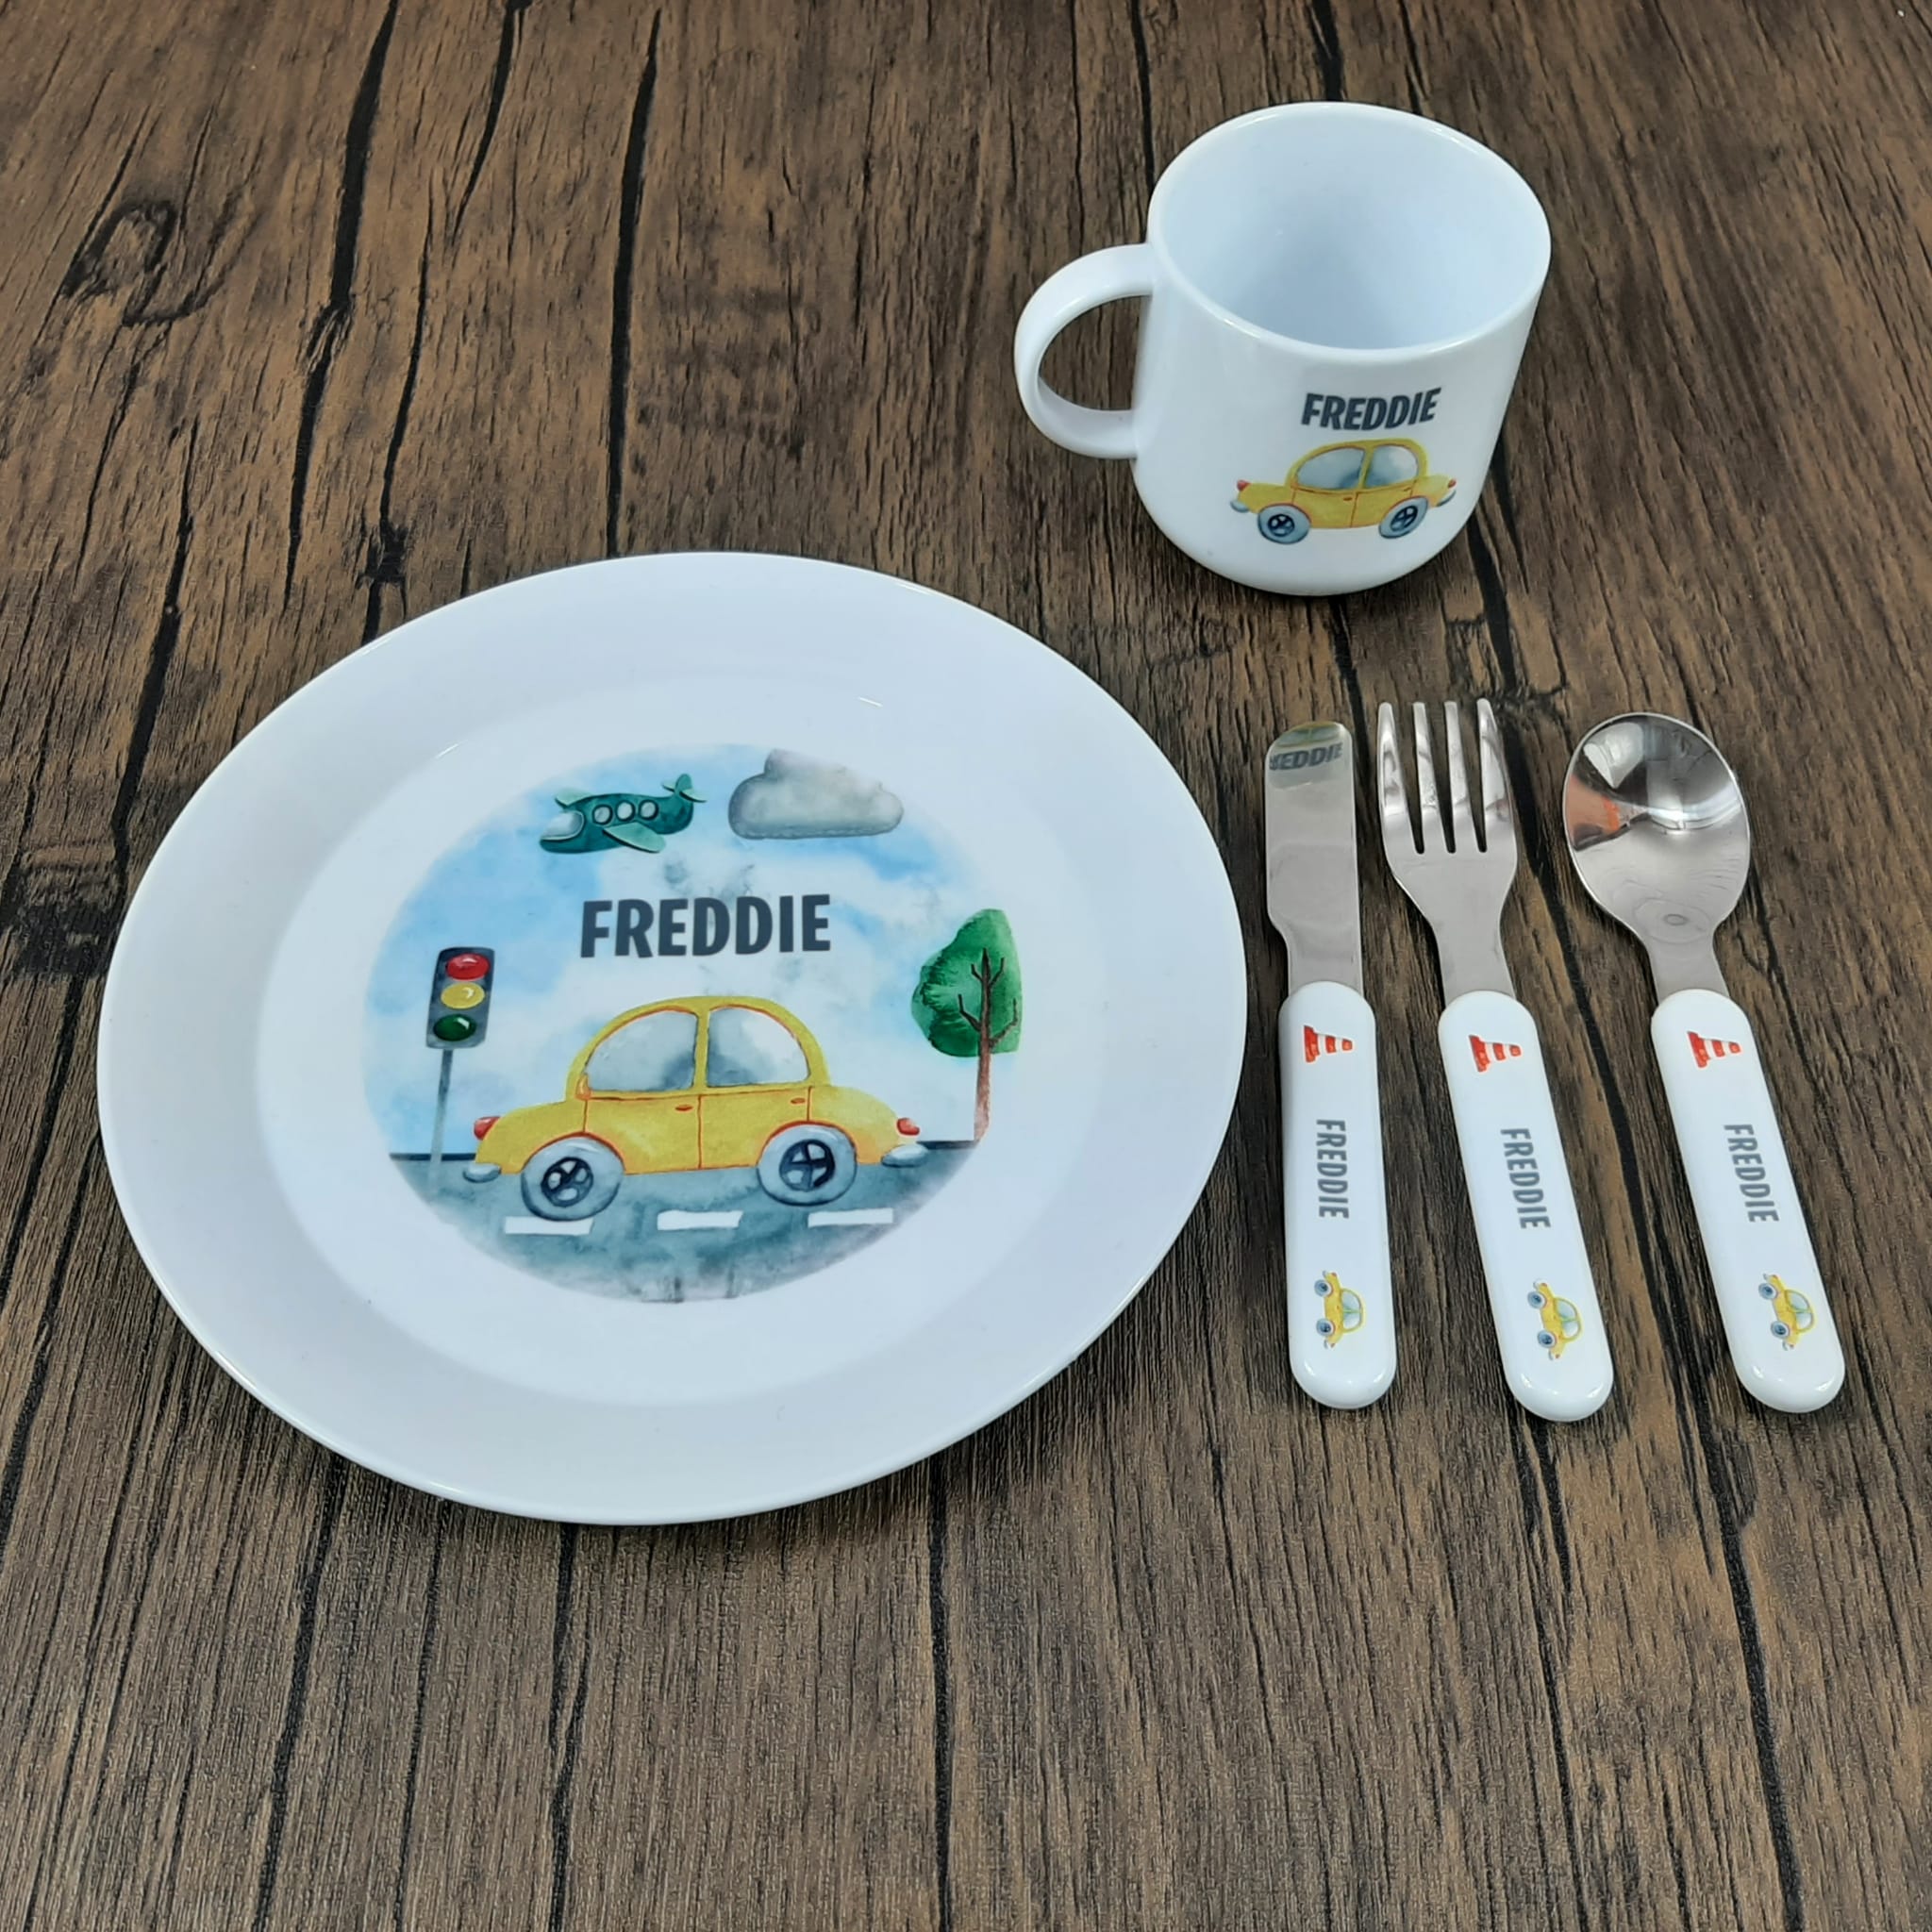 Children's Plastic Dinner Set, with plate, mug and cutlery with personalisation and fun designs. This one is a car